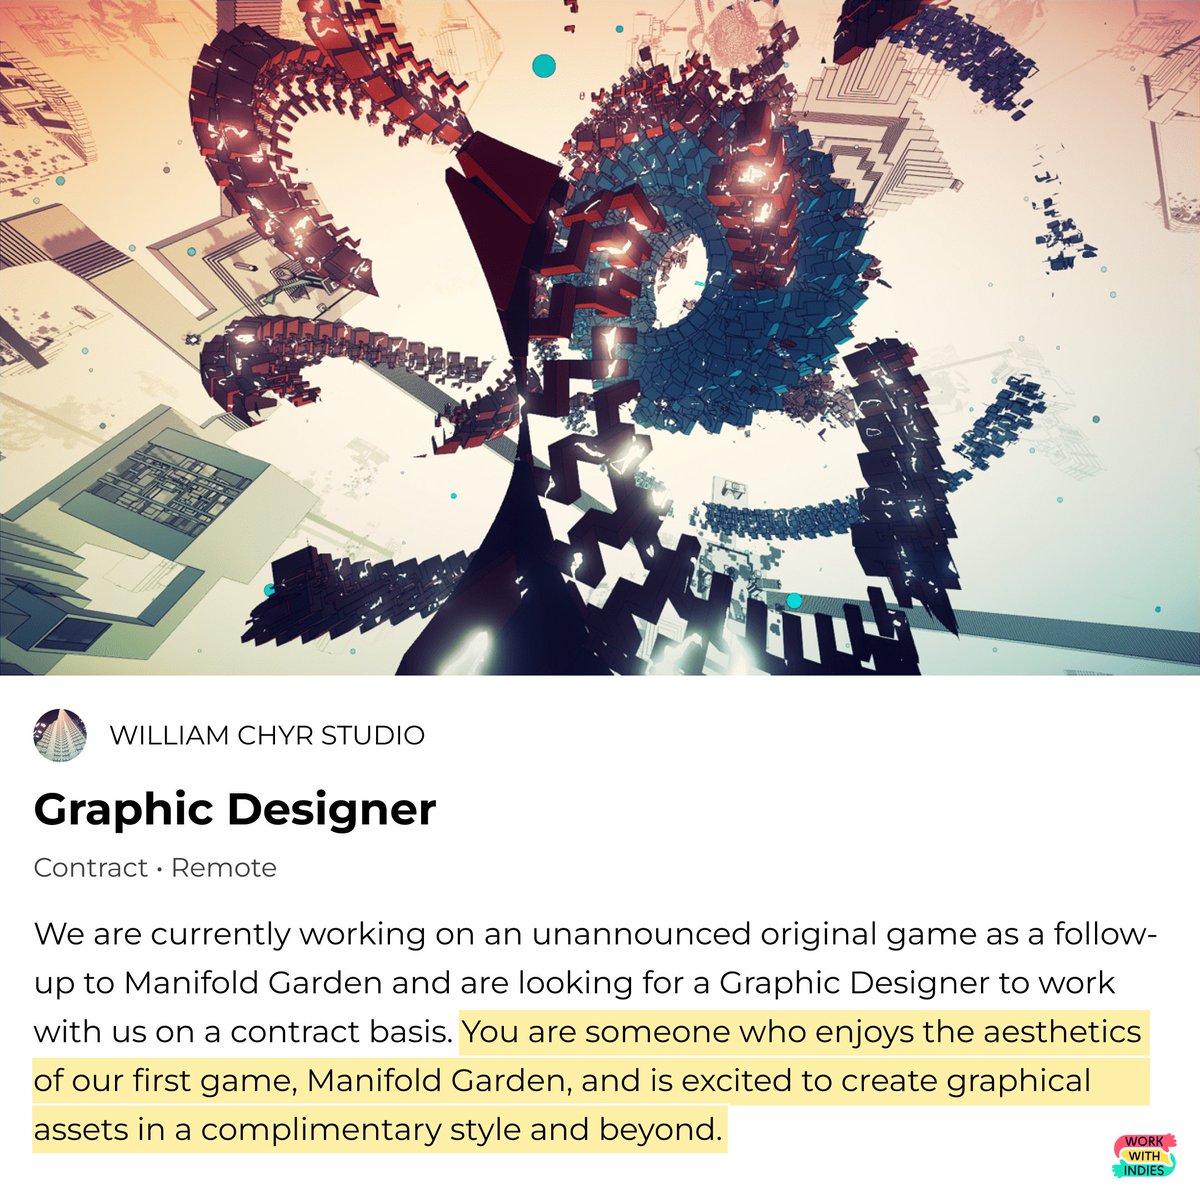 The creators of Manifold Garden are looking for a Graphic Designer with experience in branding, print, and digital products for a new, original game. 🤩 Graphic Designer 🌐 Remote 💼 Contract (10-20 hours per week) Apply below ⤵️